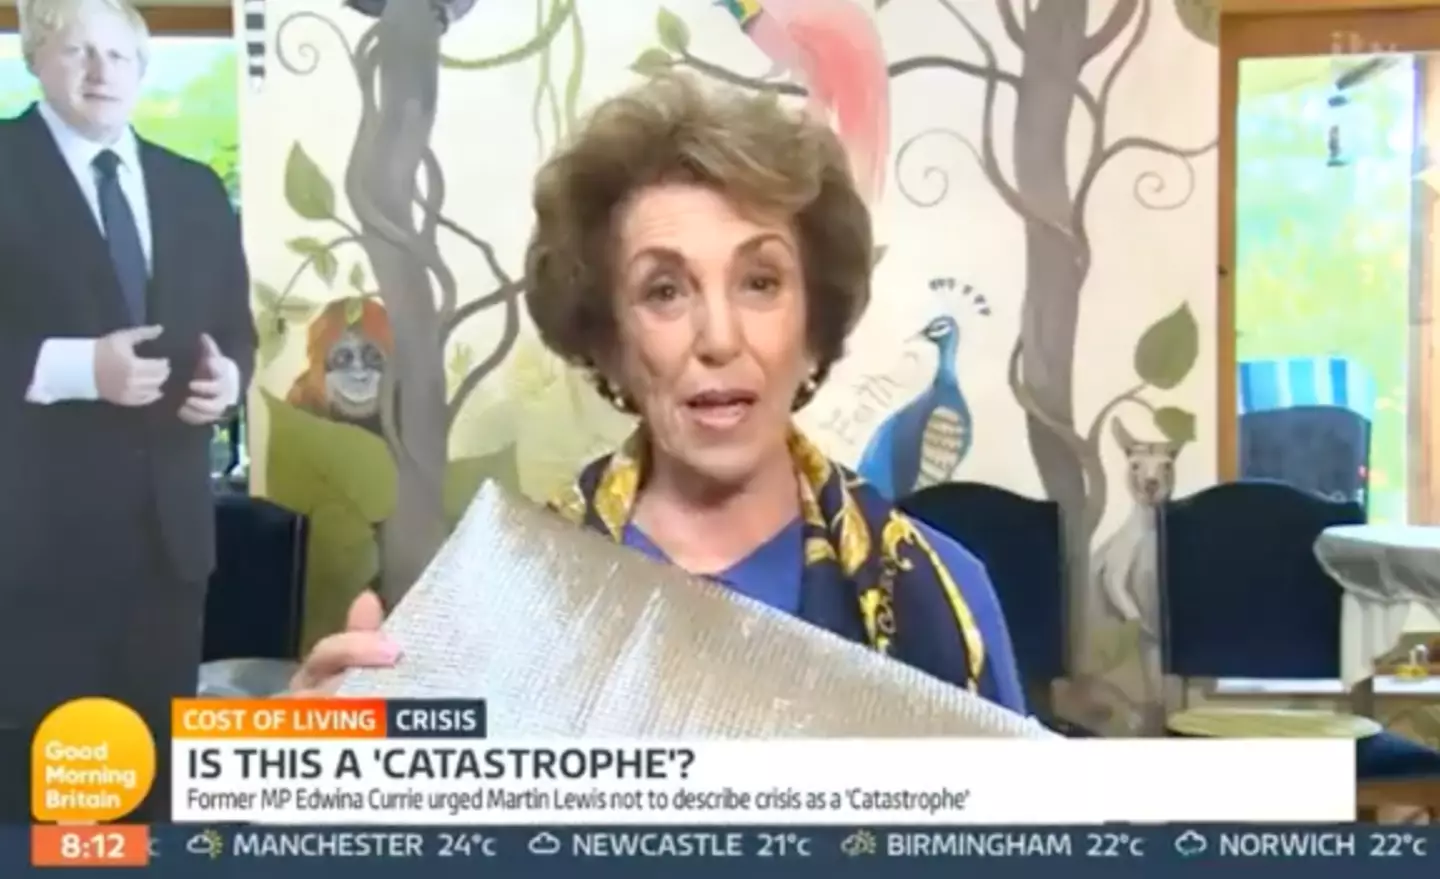 People criticised Edwina Currie's tip.